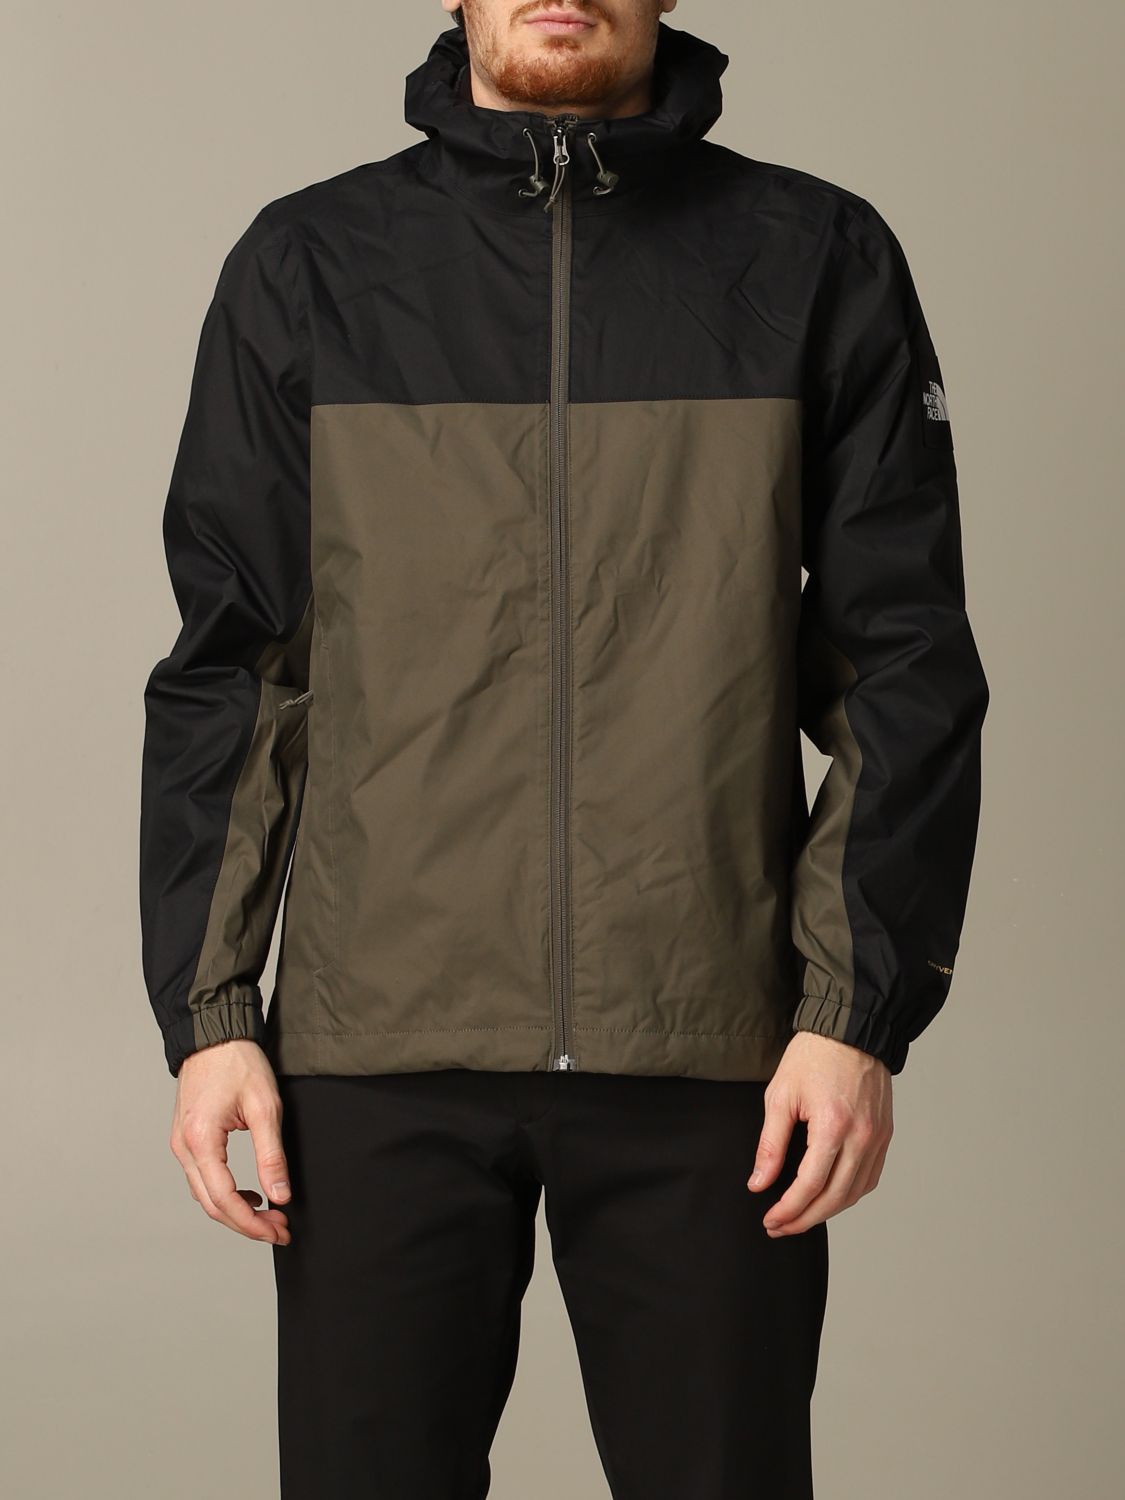 north face military discount 